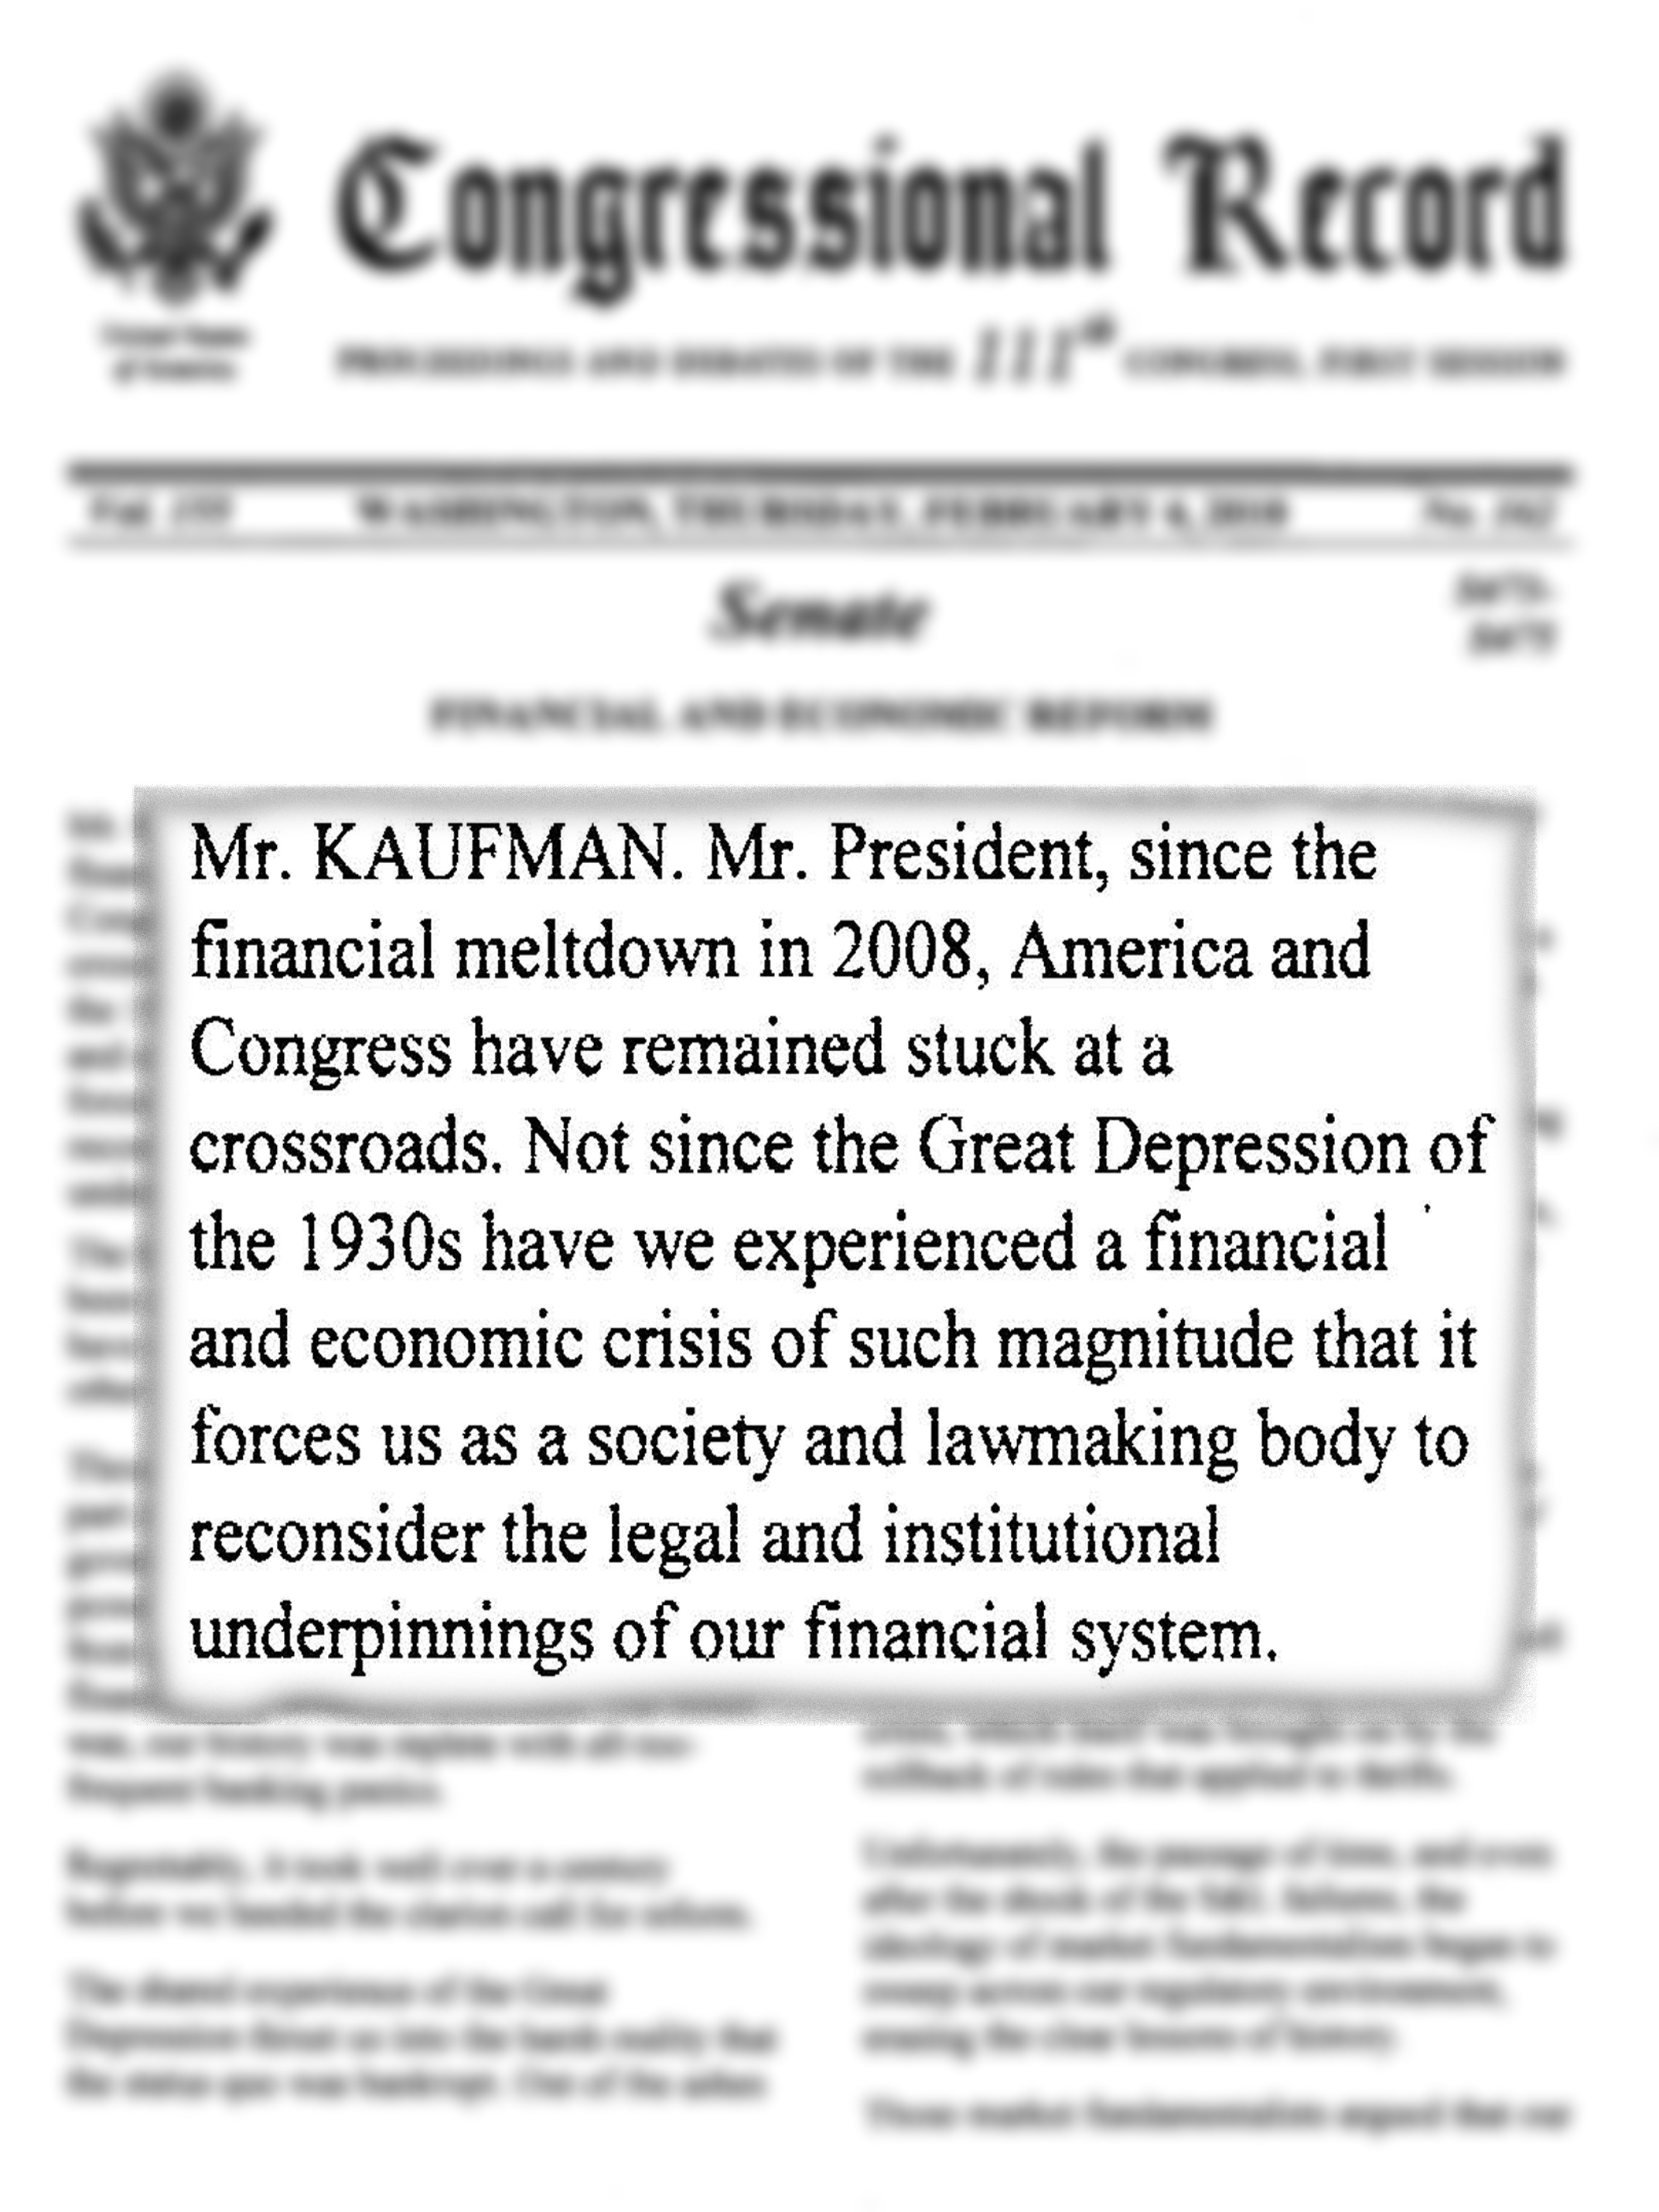 Excerpt from financial and economic reform statement, Congressional Record, 2010 February 4